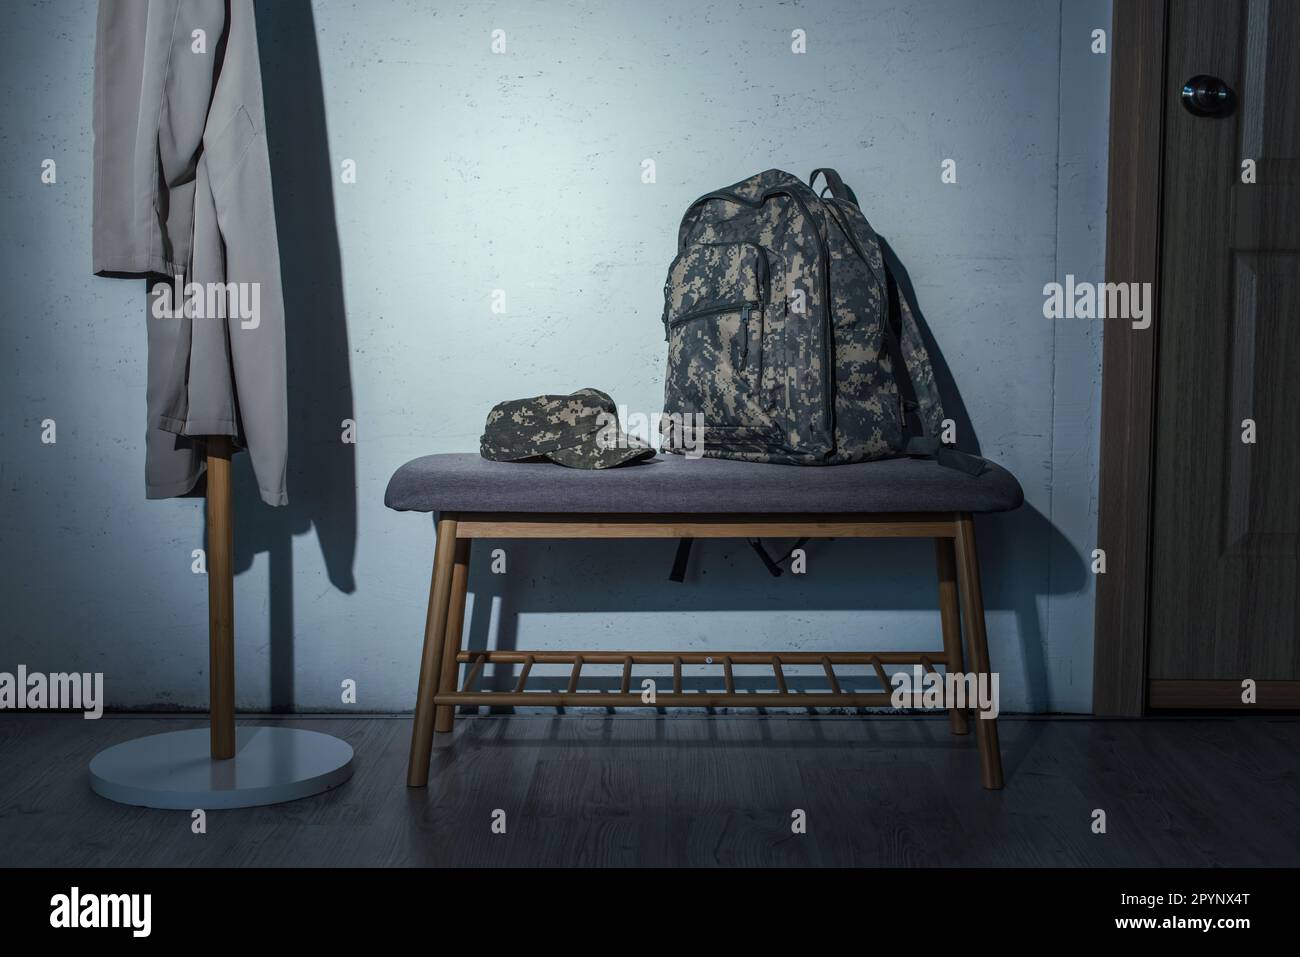 Military backpack and cap on bench in hallway at home at night,stock image Stock Photo